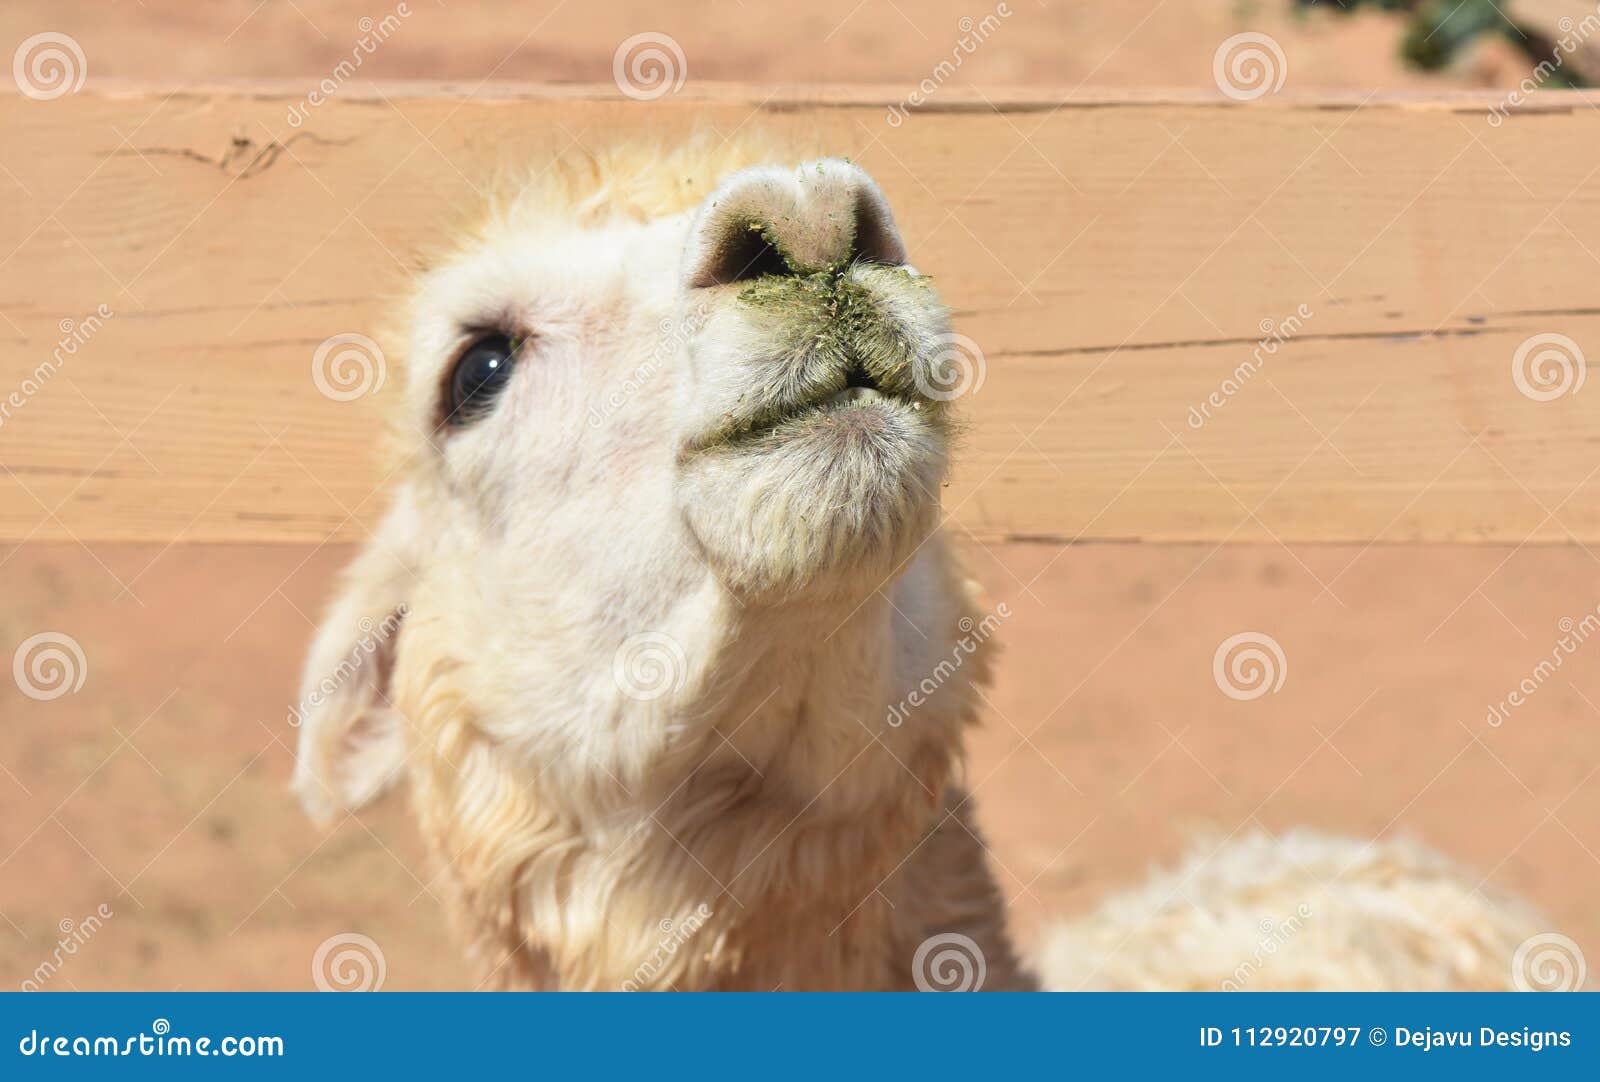 Close Up Look At The White Face Of A Cute Alpaca Stock Image Image Of Wild Llama